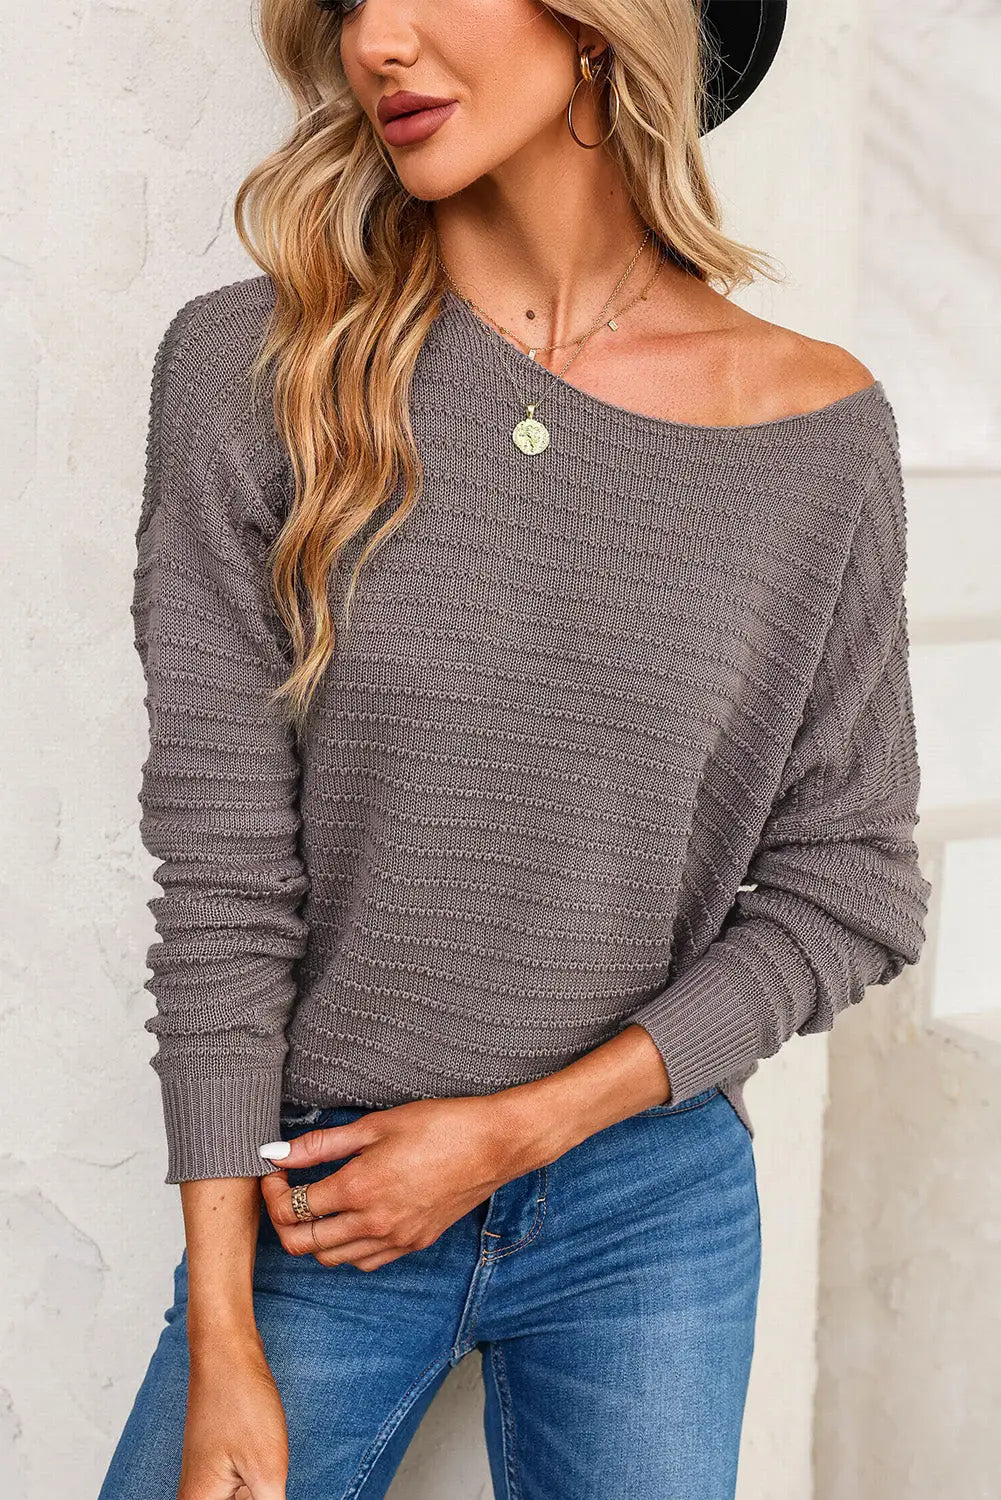 Duffel green textured knit round neck dolman sleeve sweater - gray / l 55% acrylic + 45% cotton sweaters & cardigans